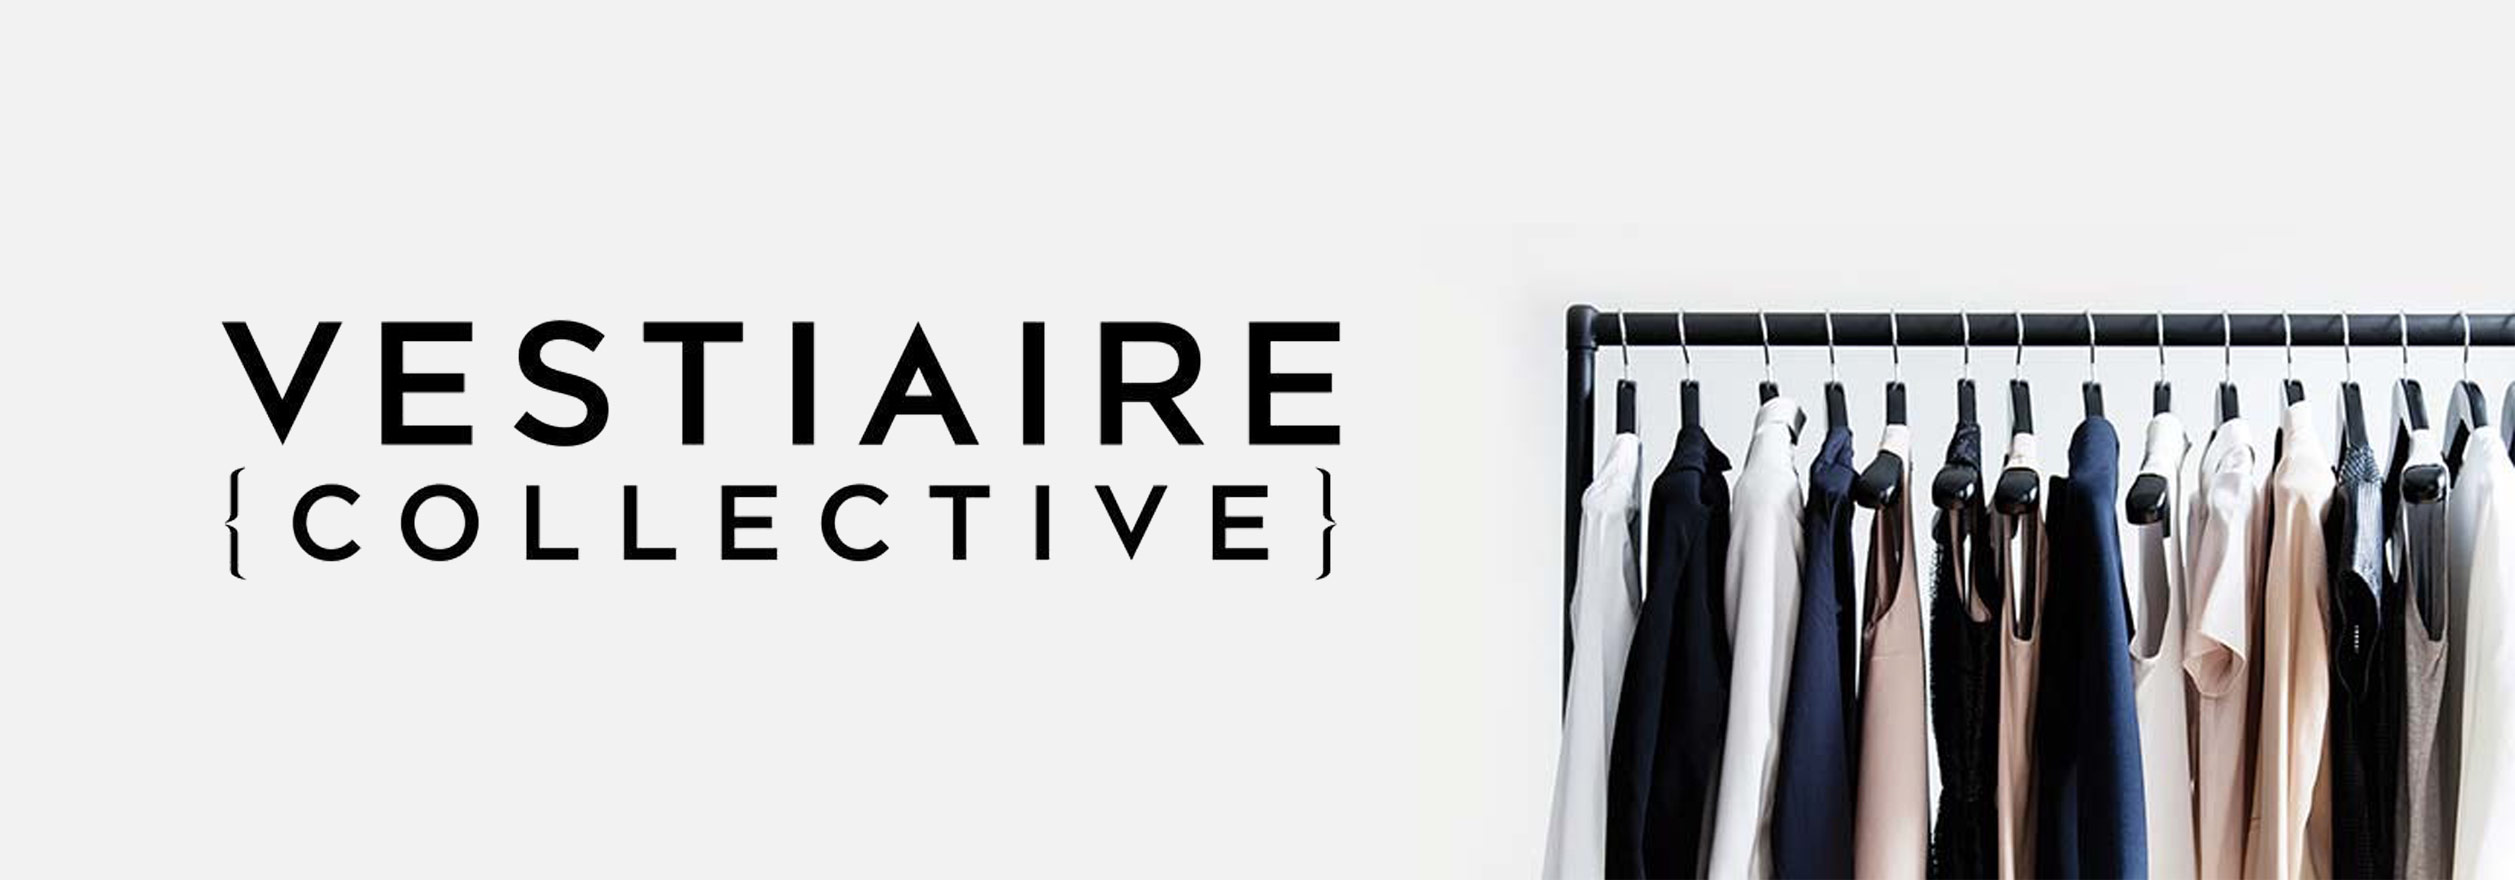 Vestiaire Collective funding rounds 2021